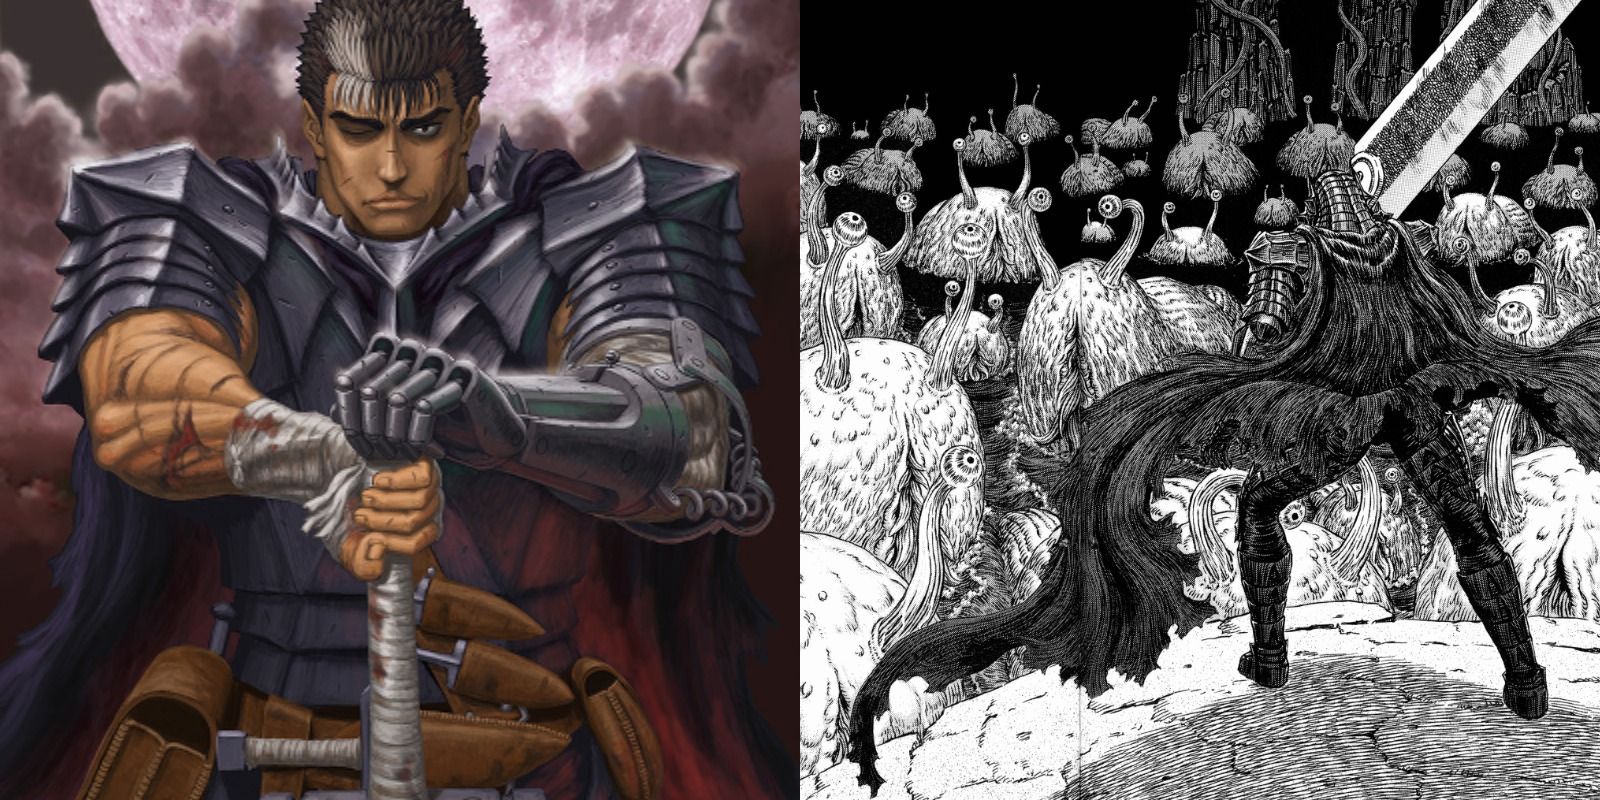 Guts on the cover of Berserk vol. 38 and in the Sea God's lair during the Fantasia arc